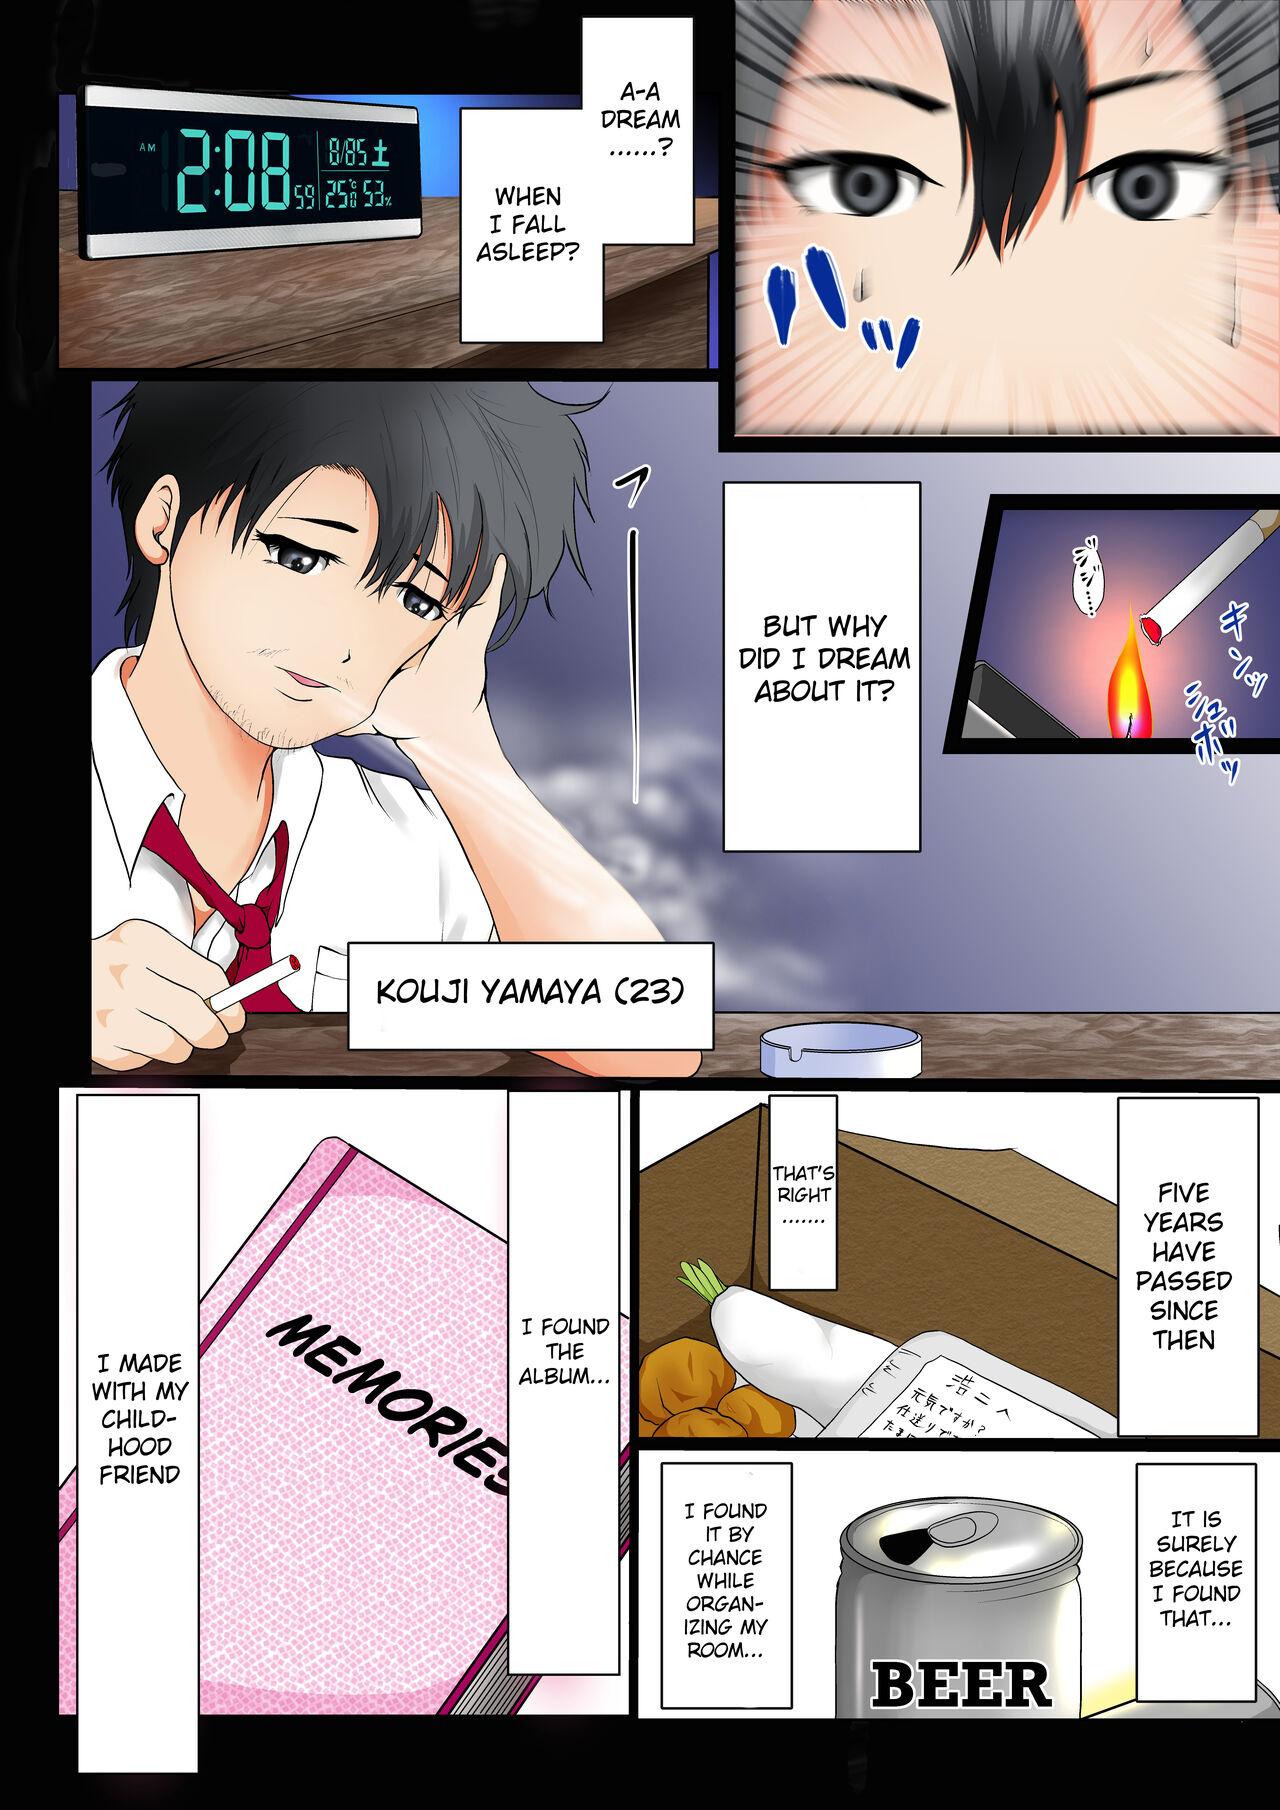 Double Penetration The reason why the bond with my childhood friend is broken so easily - Original Free - Page 5